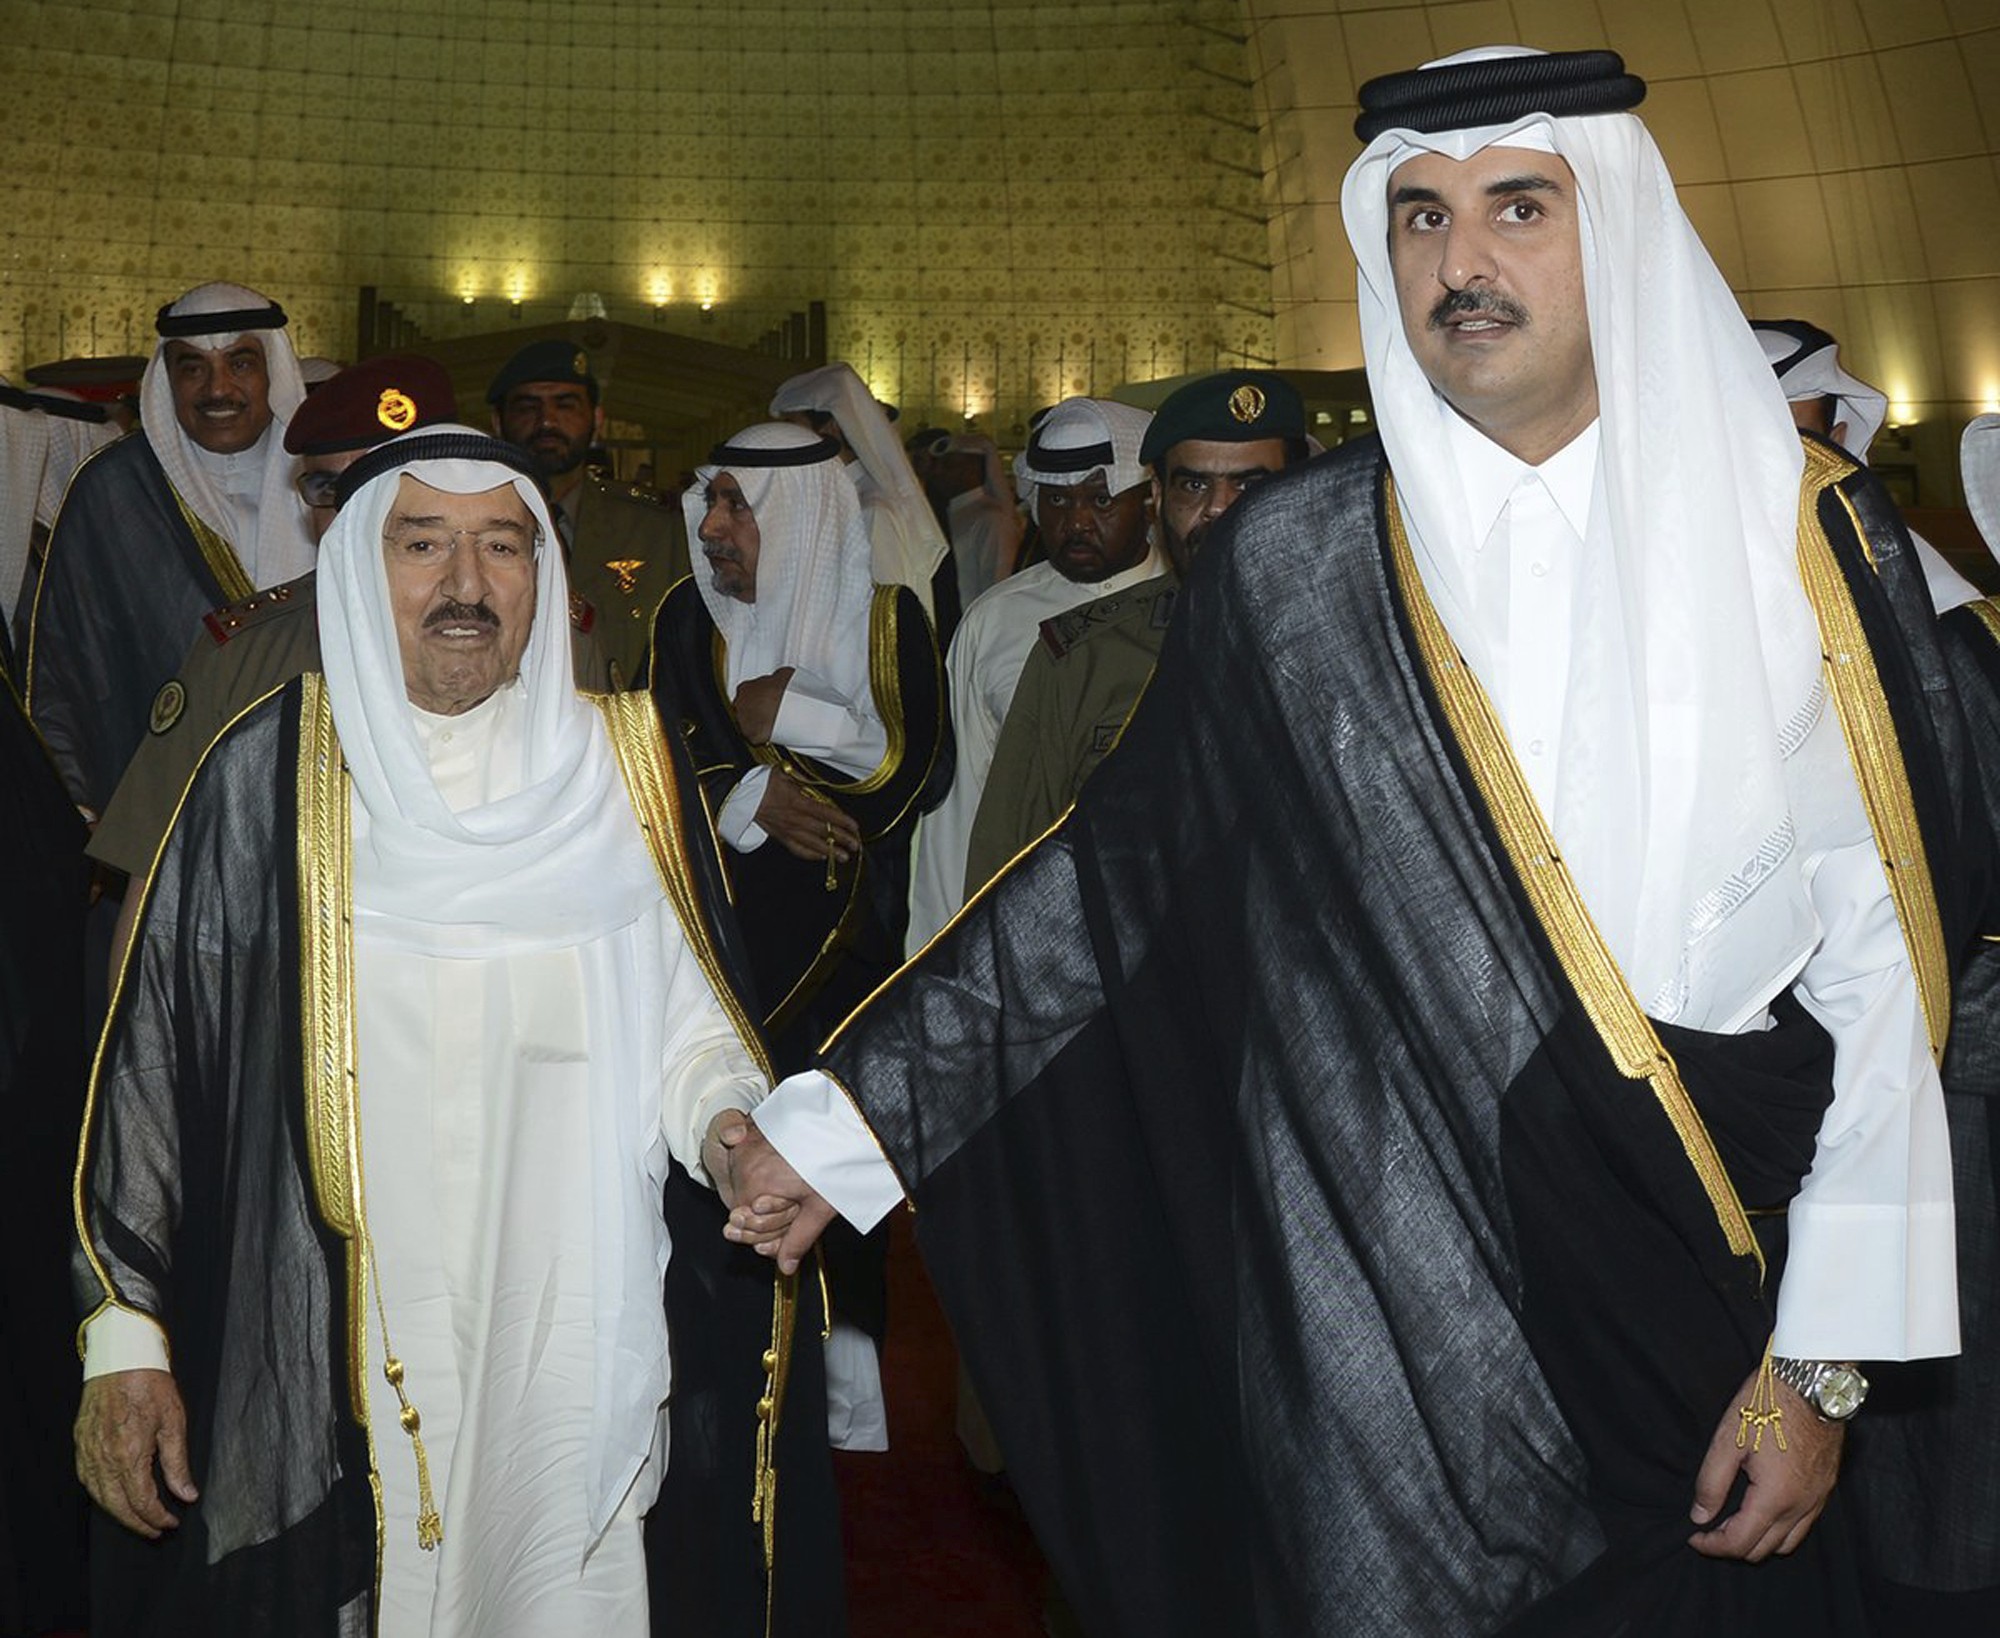 Qatar's Emir Sheikh Tamim bin Hamad Al Thani in Doha, Qatar, on June 7. His oil-rich nation has been locked in a fierce diplomatic struggle with Arab neighbours over his nation’s ties to Iran. Photo: AP